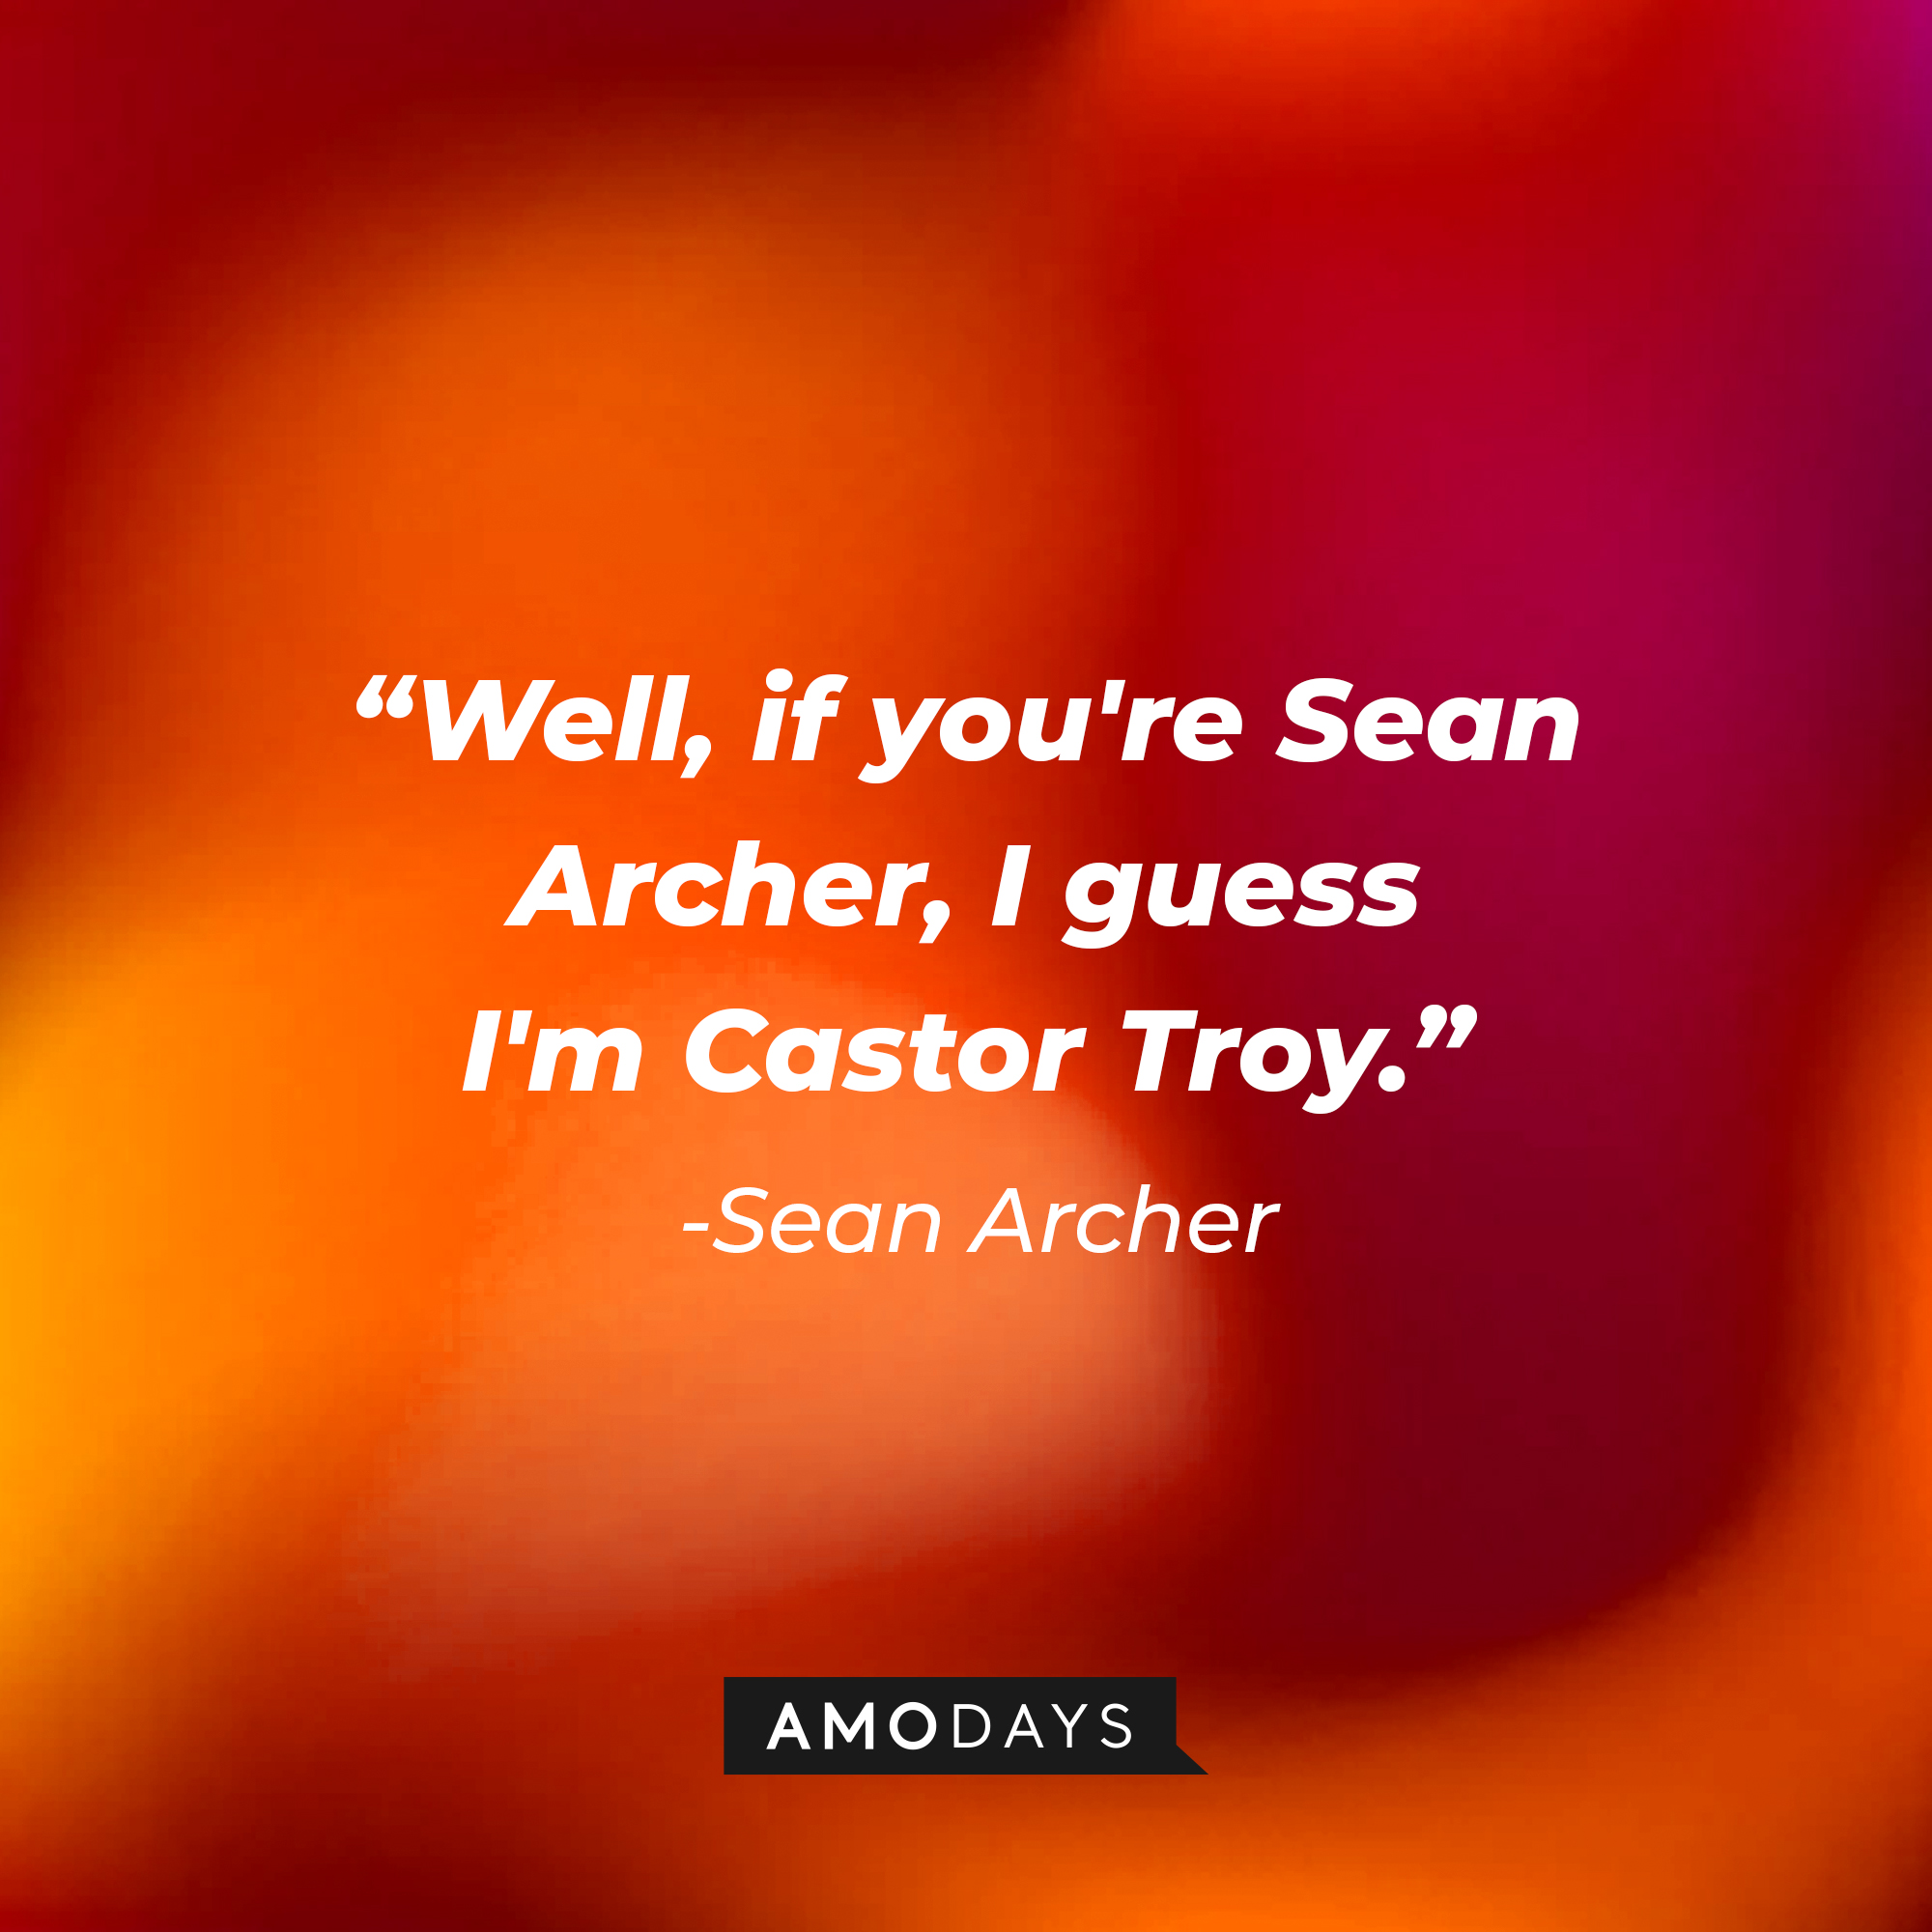 Sean Archer's quote: “Well, if you're Sean Archer, I guess I'm Castor Troy.” : Source: Amodays